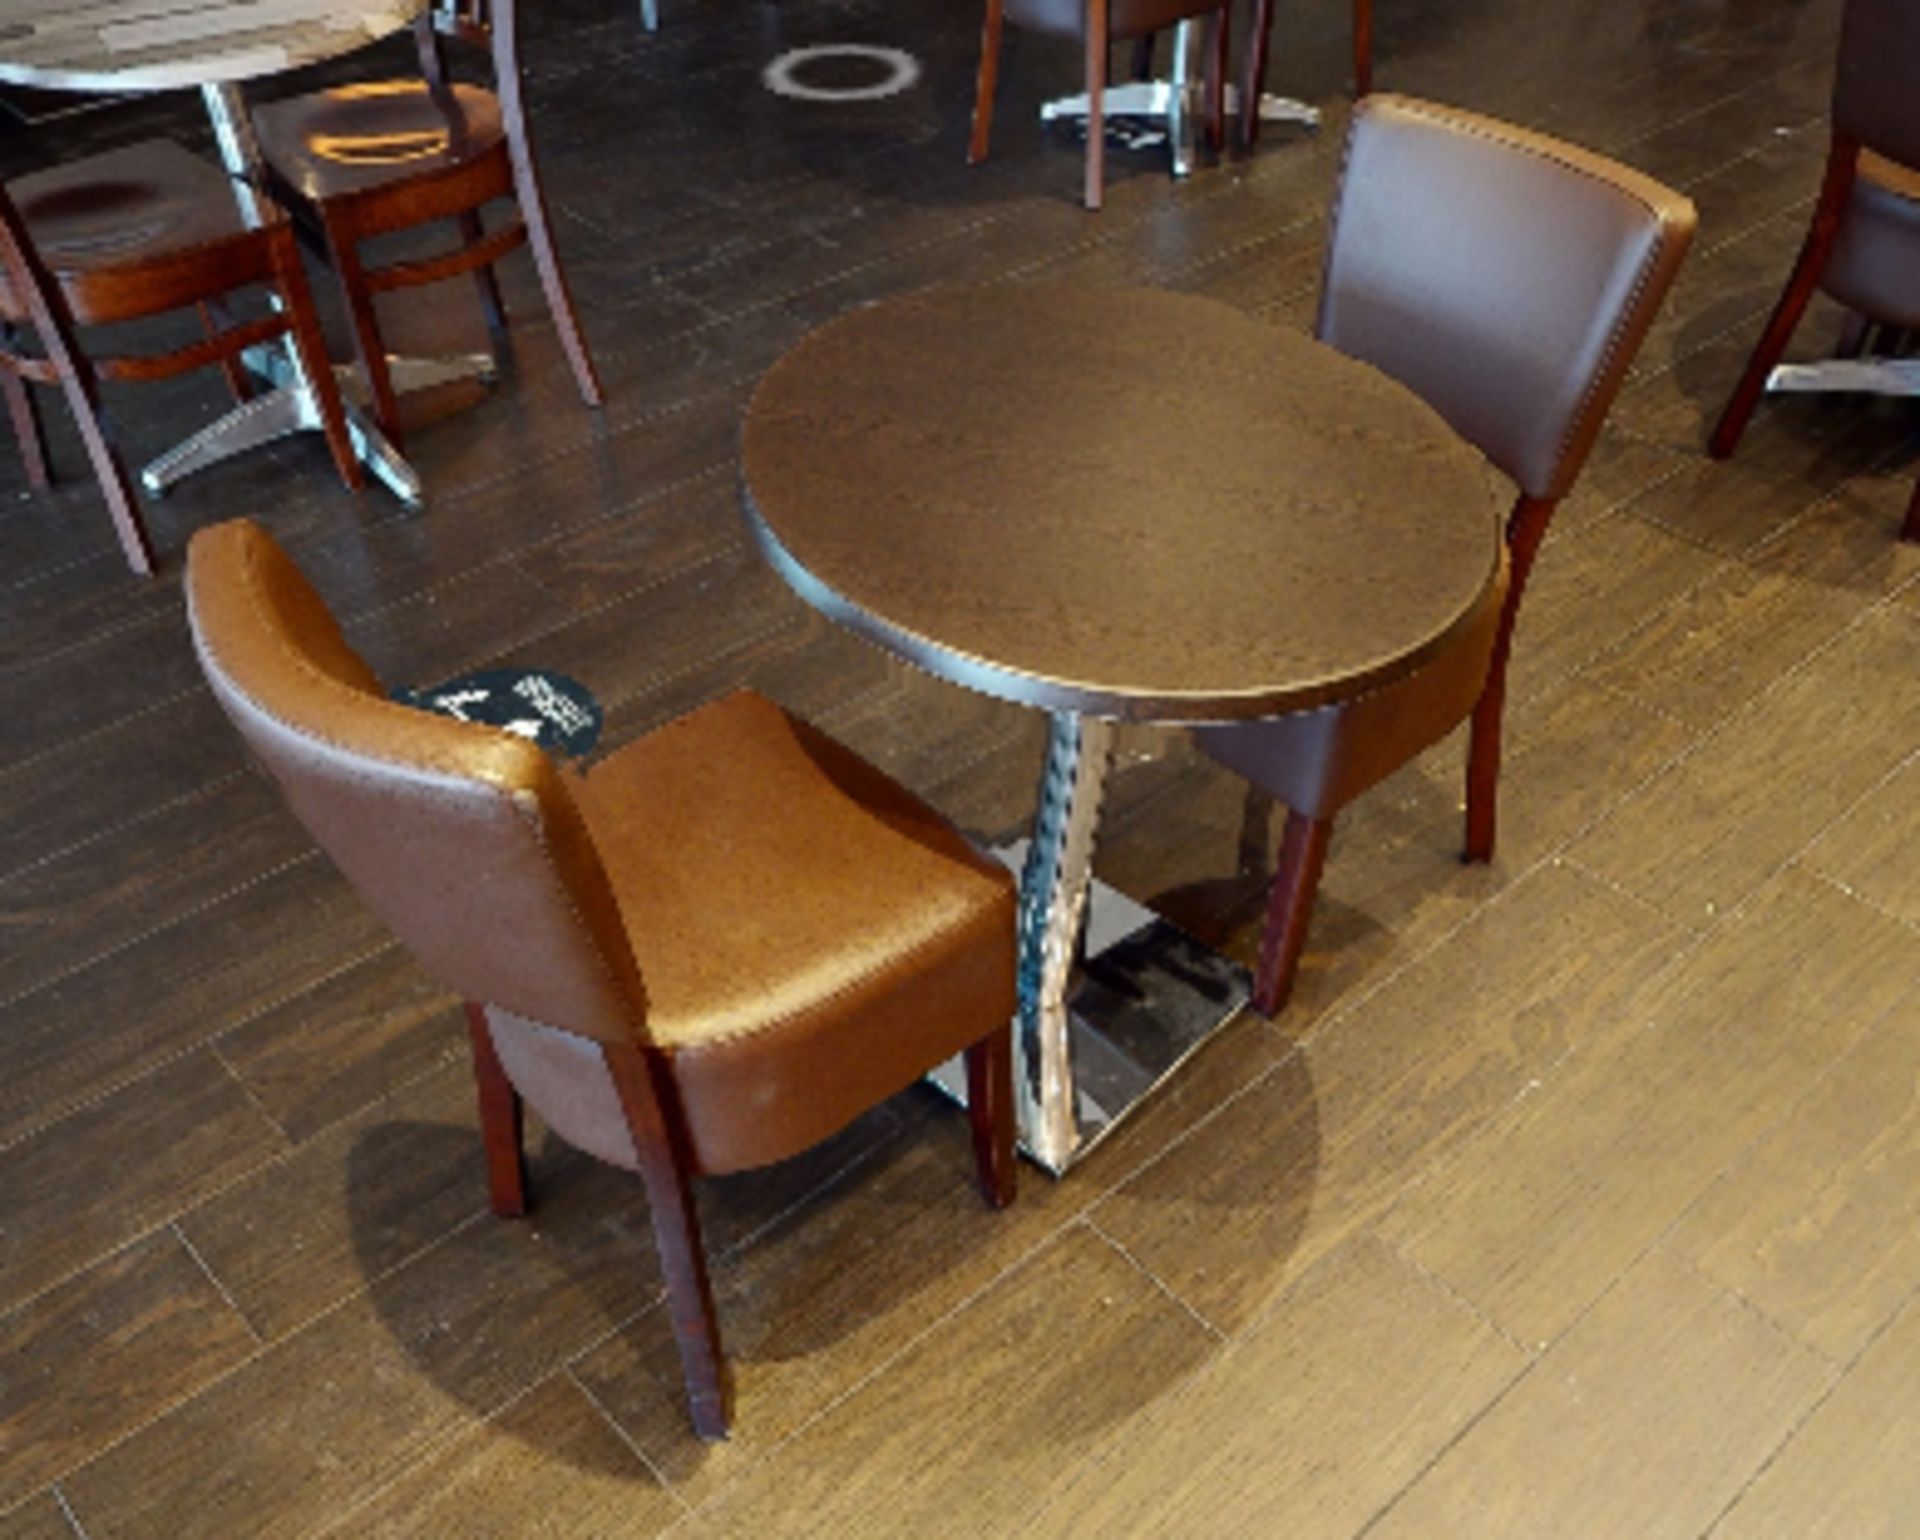 4 x Restaurant Chairs With Brown Leather Seat Pads and Padded Backrests - CL701 - Location: Ashton - Image 9 of 9